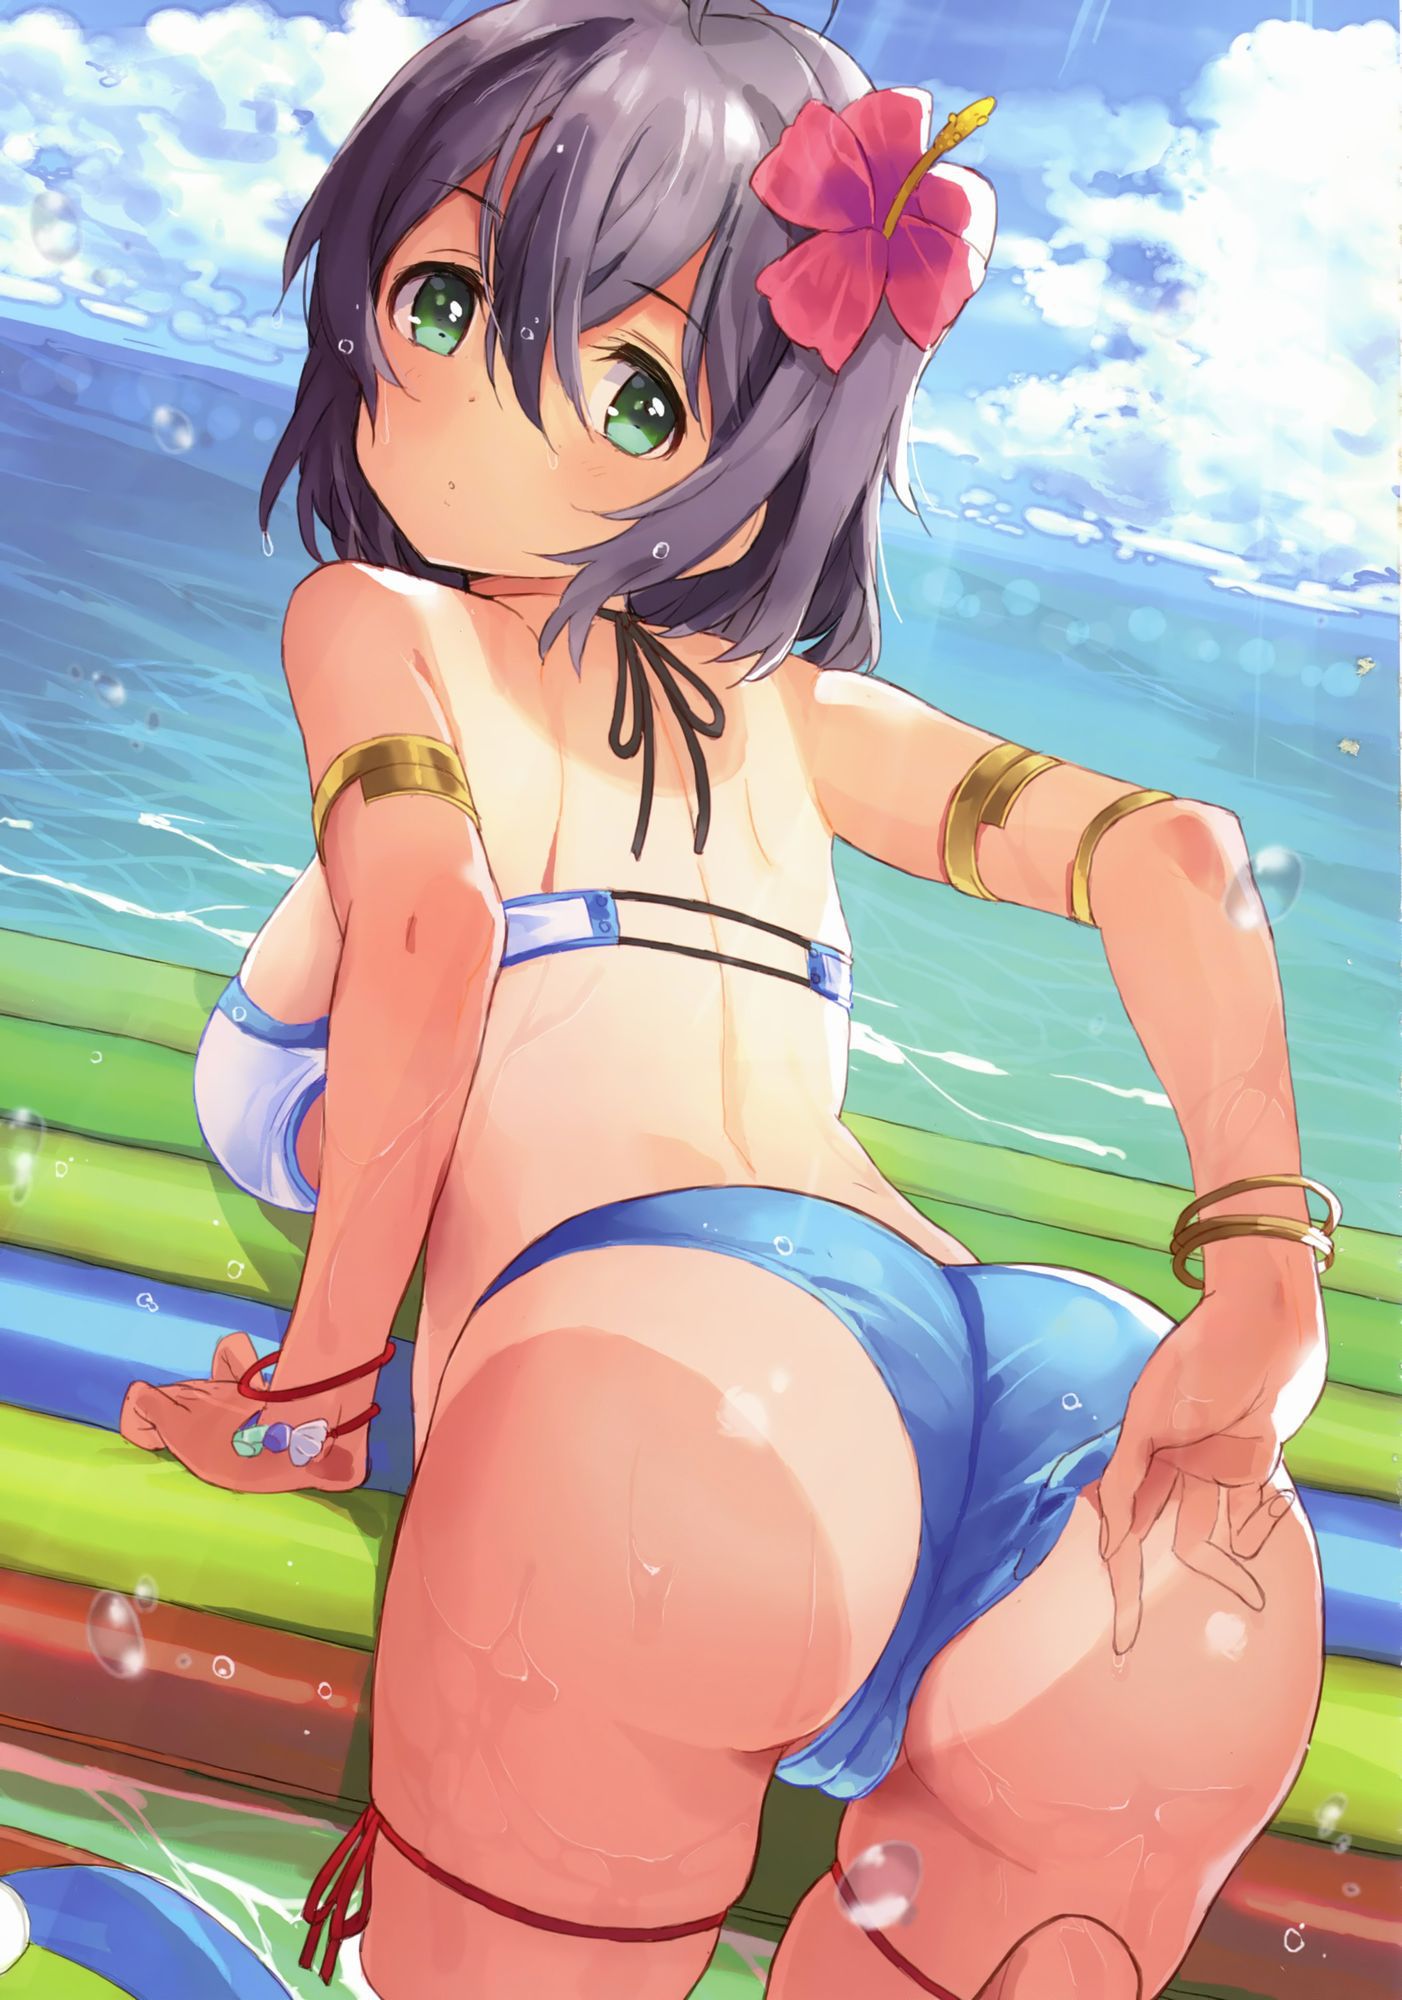 【Secondary Erotic】 Erotic image of a naughty girl fixing a swimsuit or pants that has been eaten up is here 18